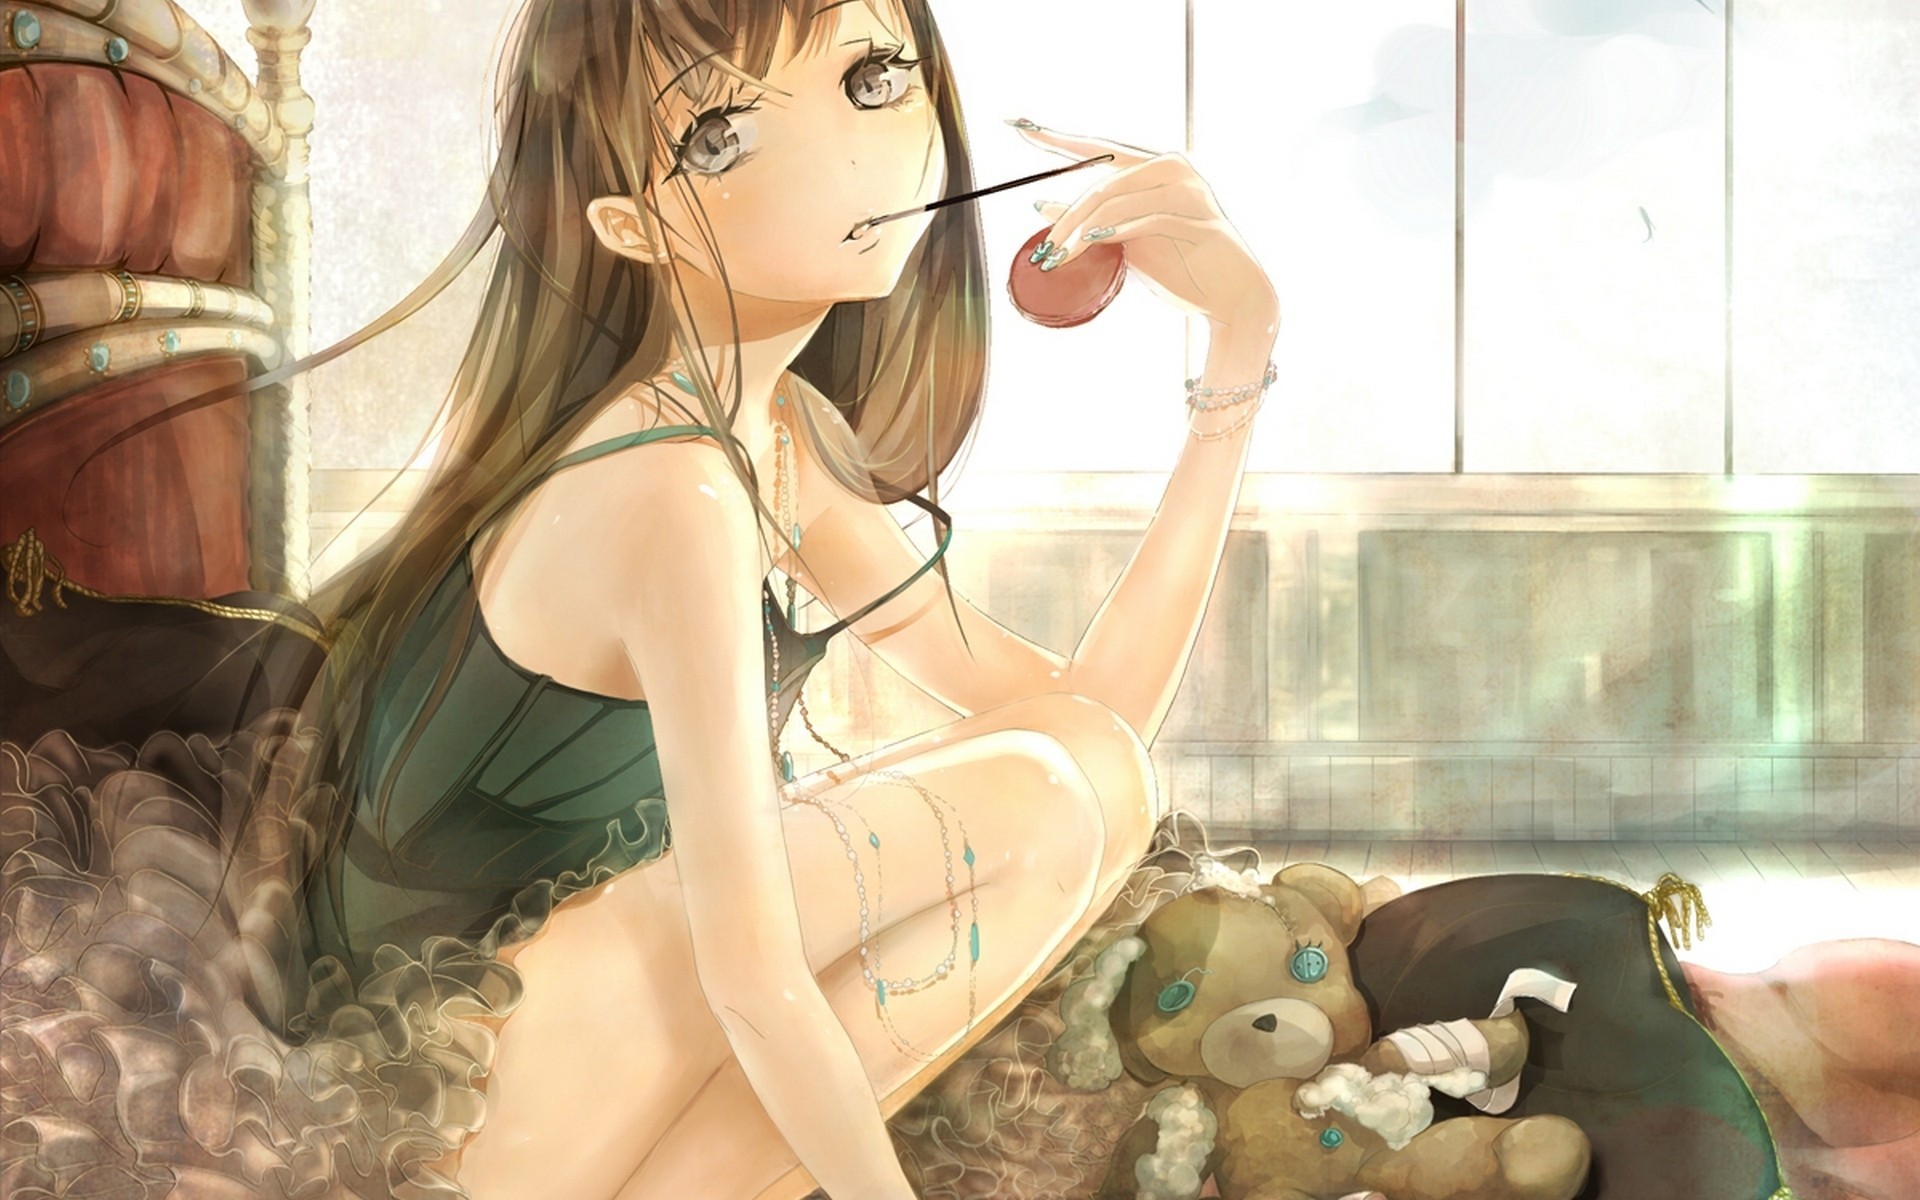 Anime 1920x1200 original characters Pocky teddy bears long hair anime girls Keepout women indoors indoors brunette anime plush toy